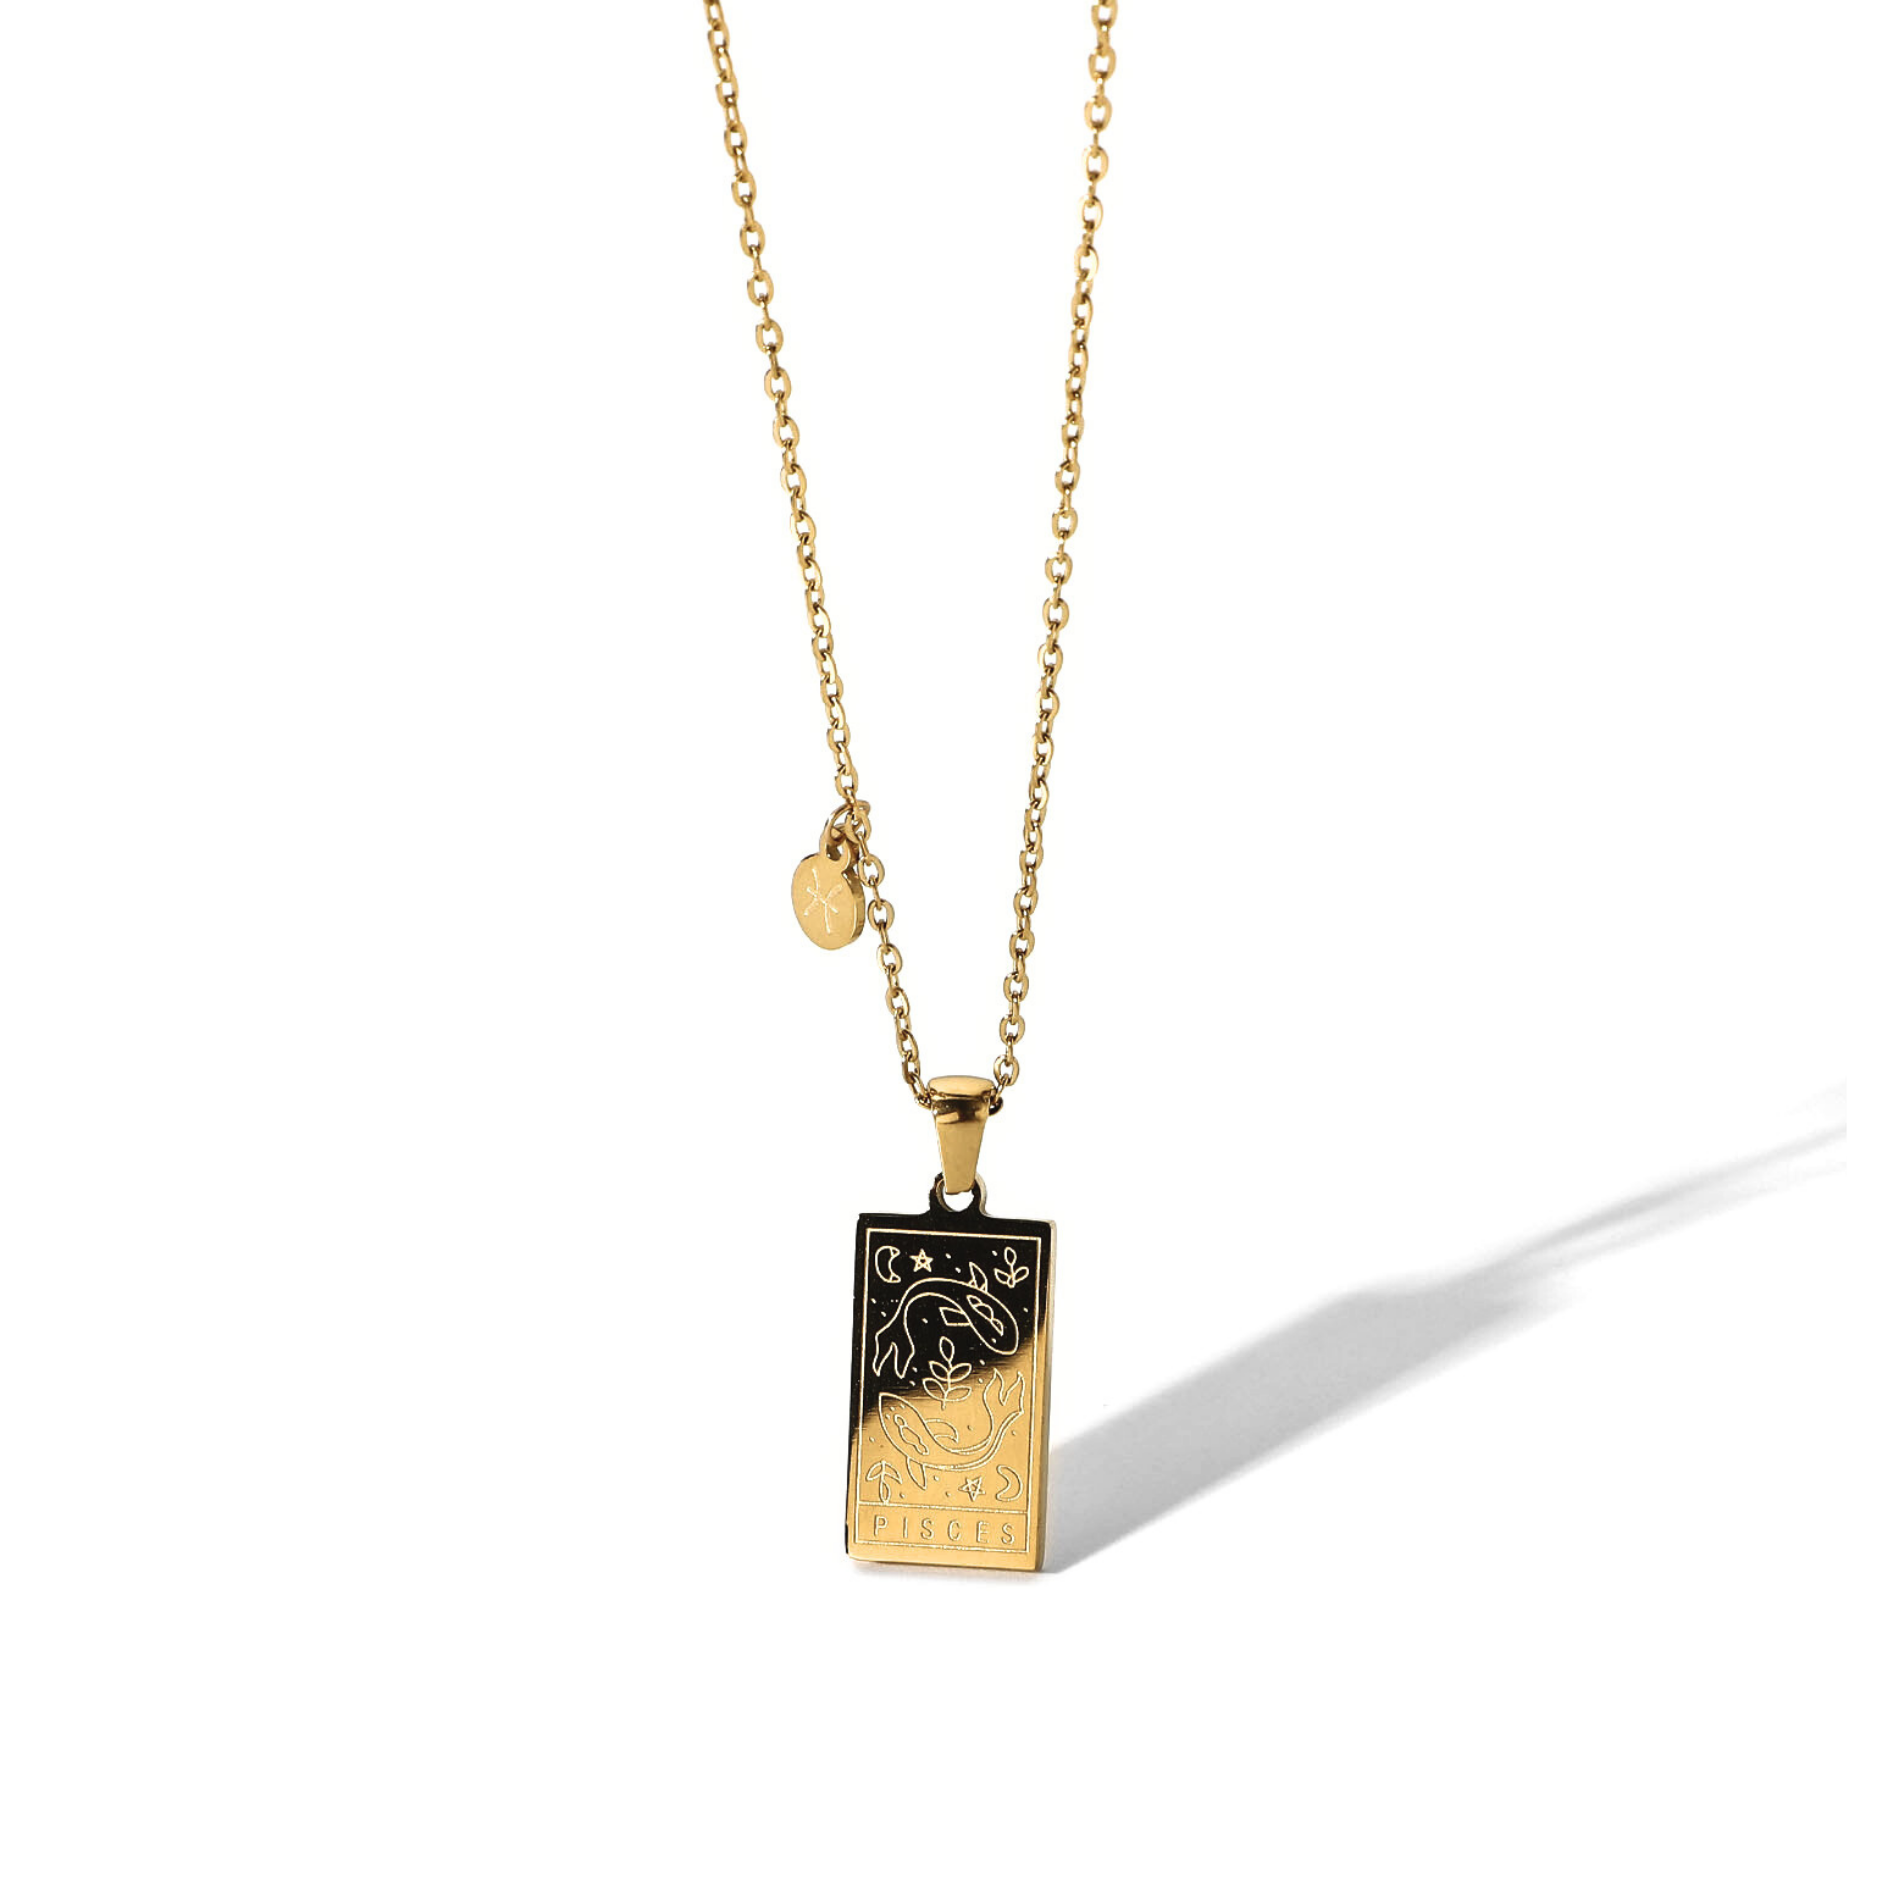 Rectangular gold pendant with two fish engraved and the word pisces in the bottom. Gold pendant with a chain necklace. In the side of the gold pendant is a circle small medalion with the symbol of pisces engraved on it. Pisces zodiac pendant gold necklace.